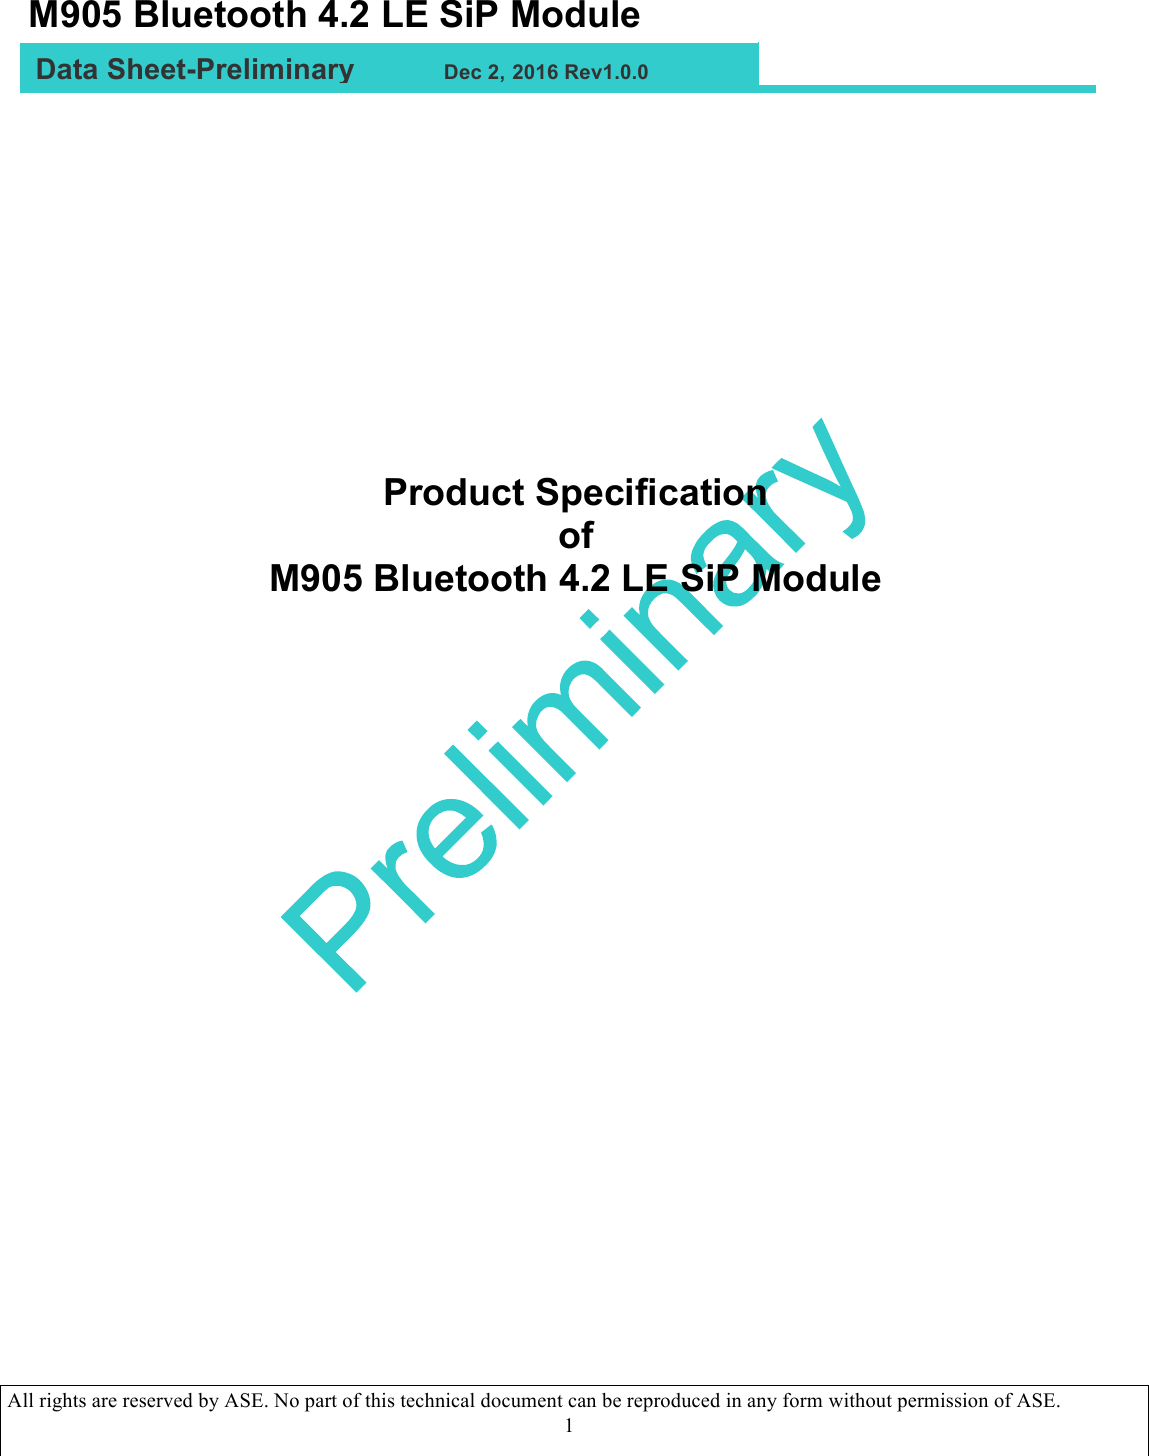   All rights are reserved by ASE. No part of this technical document can be reproduced in any form without permission of ASE.  1                Product Specification of  M905 Bluetooth 4.2 LE SiP Module          Data Sheet-Preliminary           Dec 2, 2016 Rev1.0.0 M905 Bluetooth 4.2 LE SiP Module  